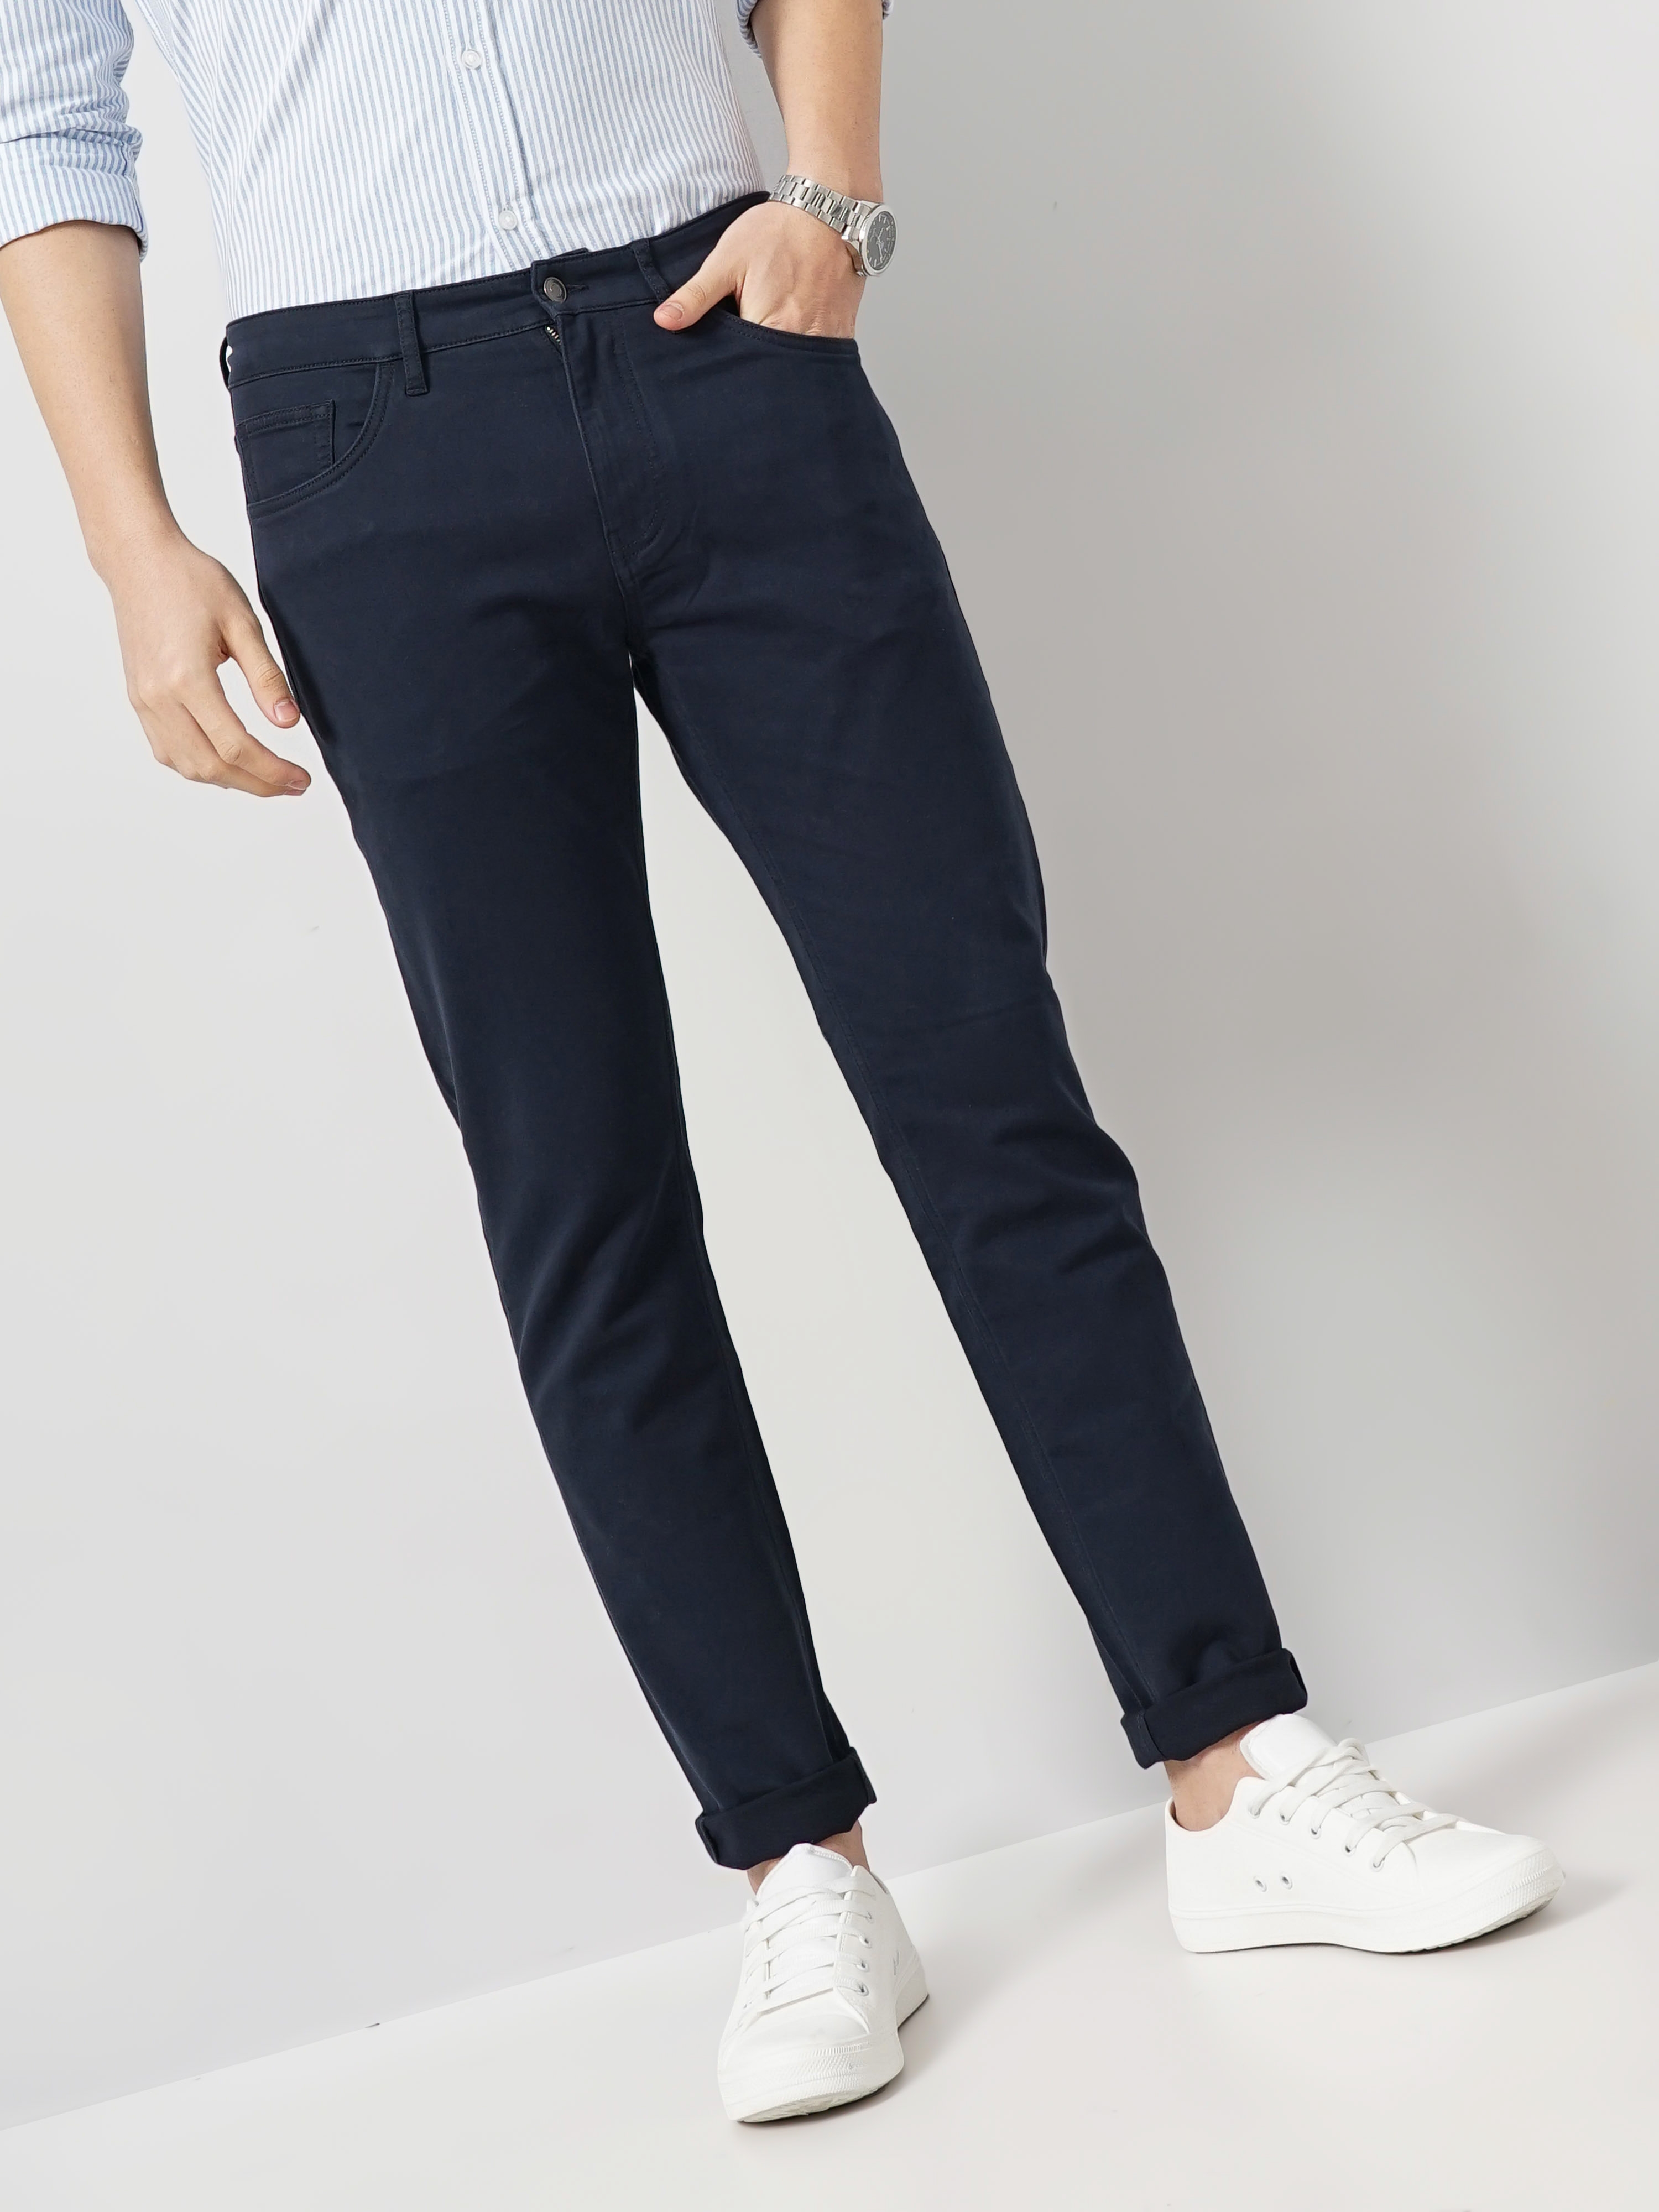 Denim Slim Men Skinny Trousers Fashion New Jeans - China Man Jean and  Wholesale Jean price | Made-in-China.com